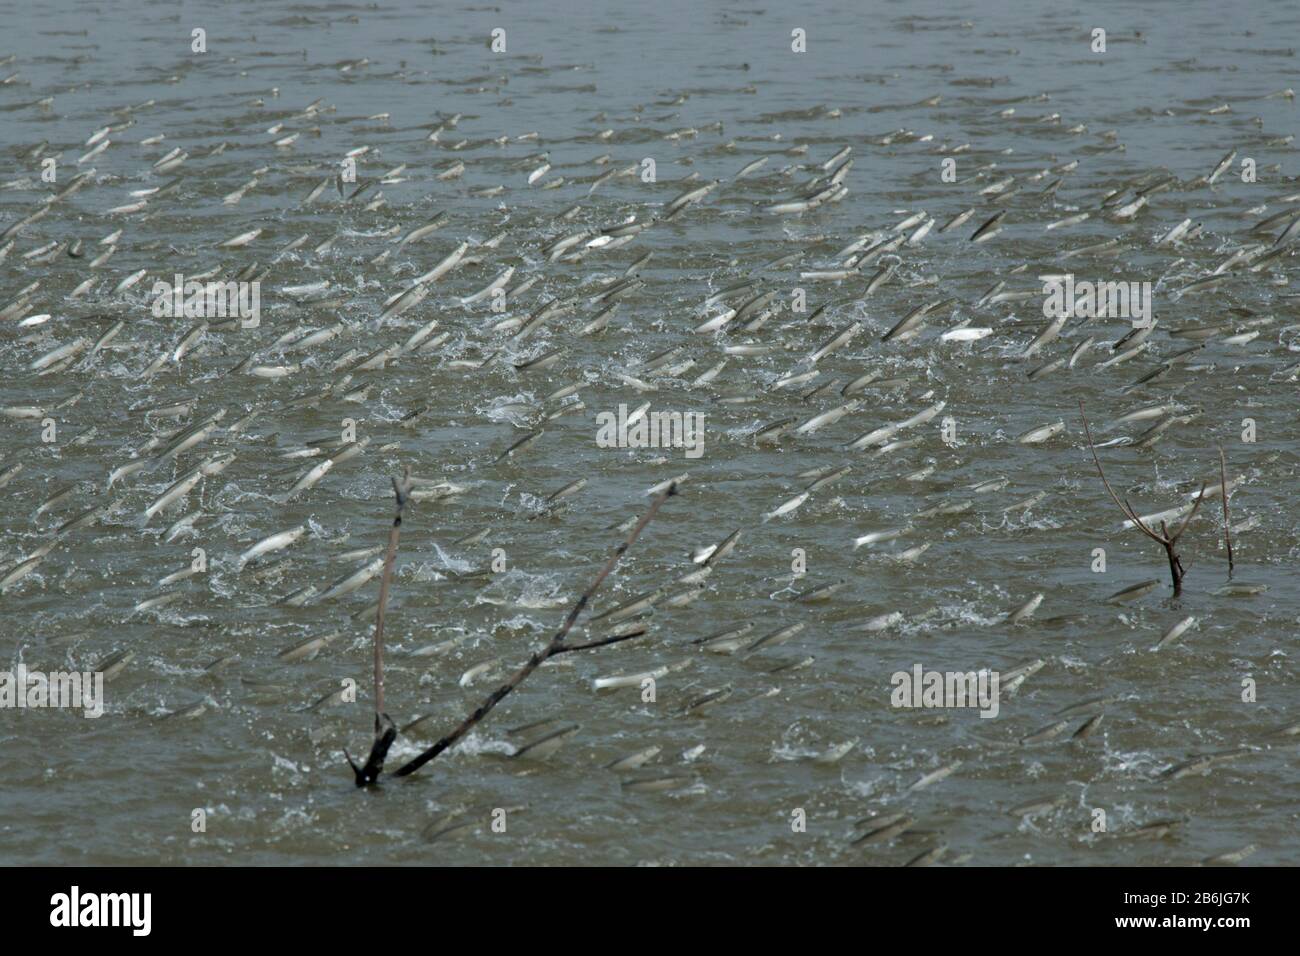 A group of Mullet fish is jumping out of the water from a pond. The fish play very important role to aerate the pond and enrich water with oxygen. Stock Photo